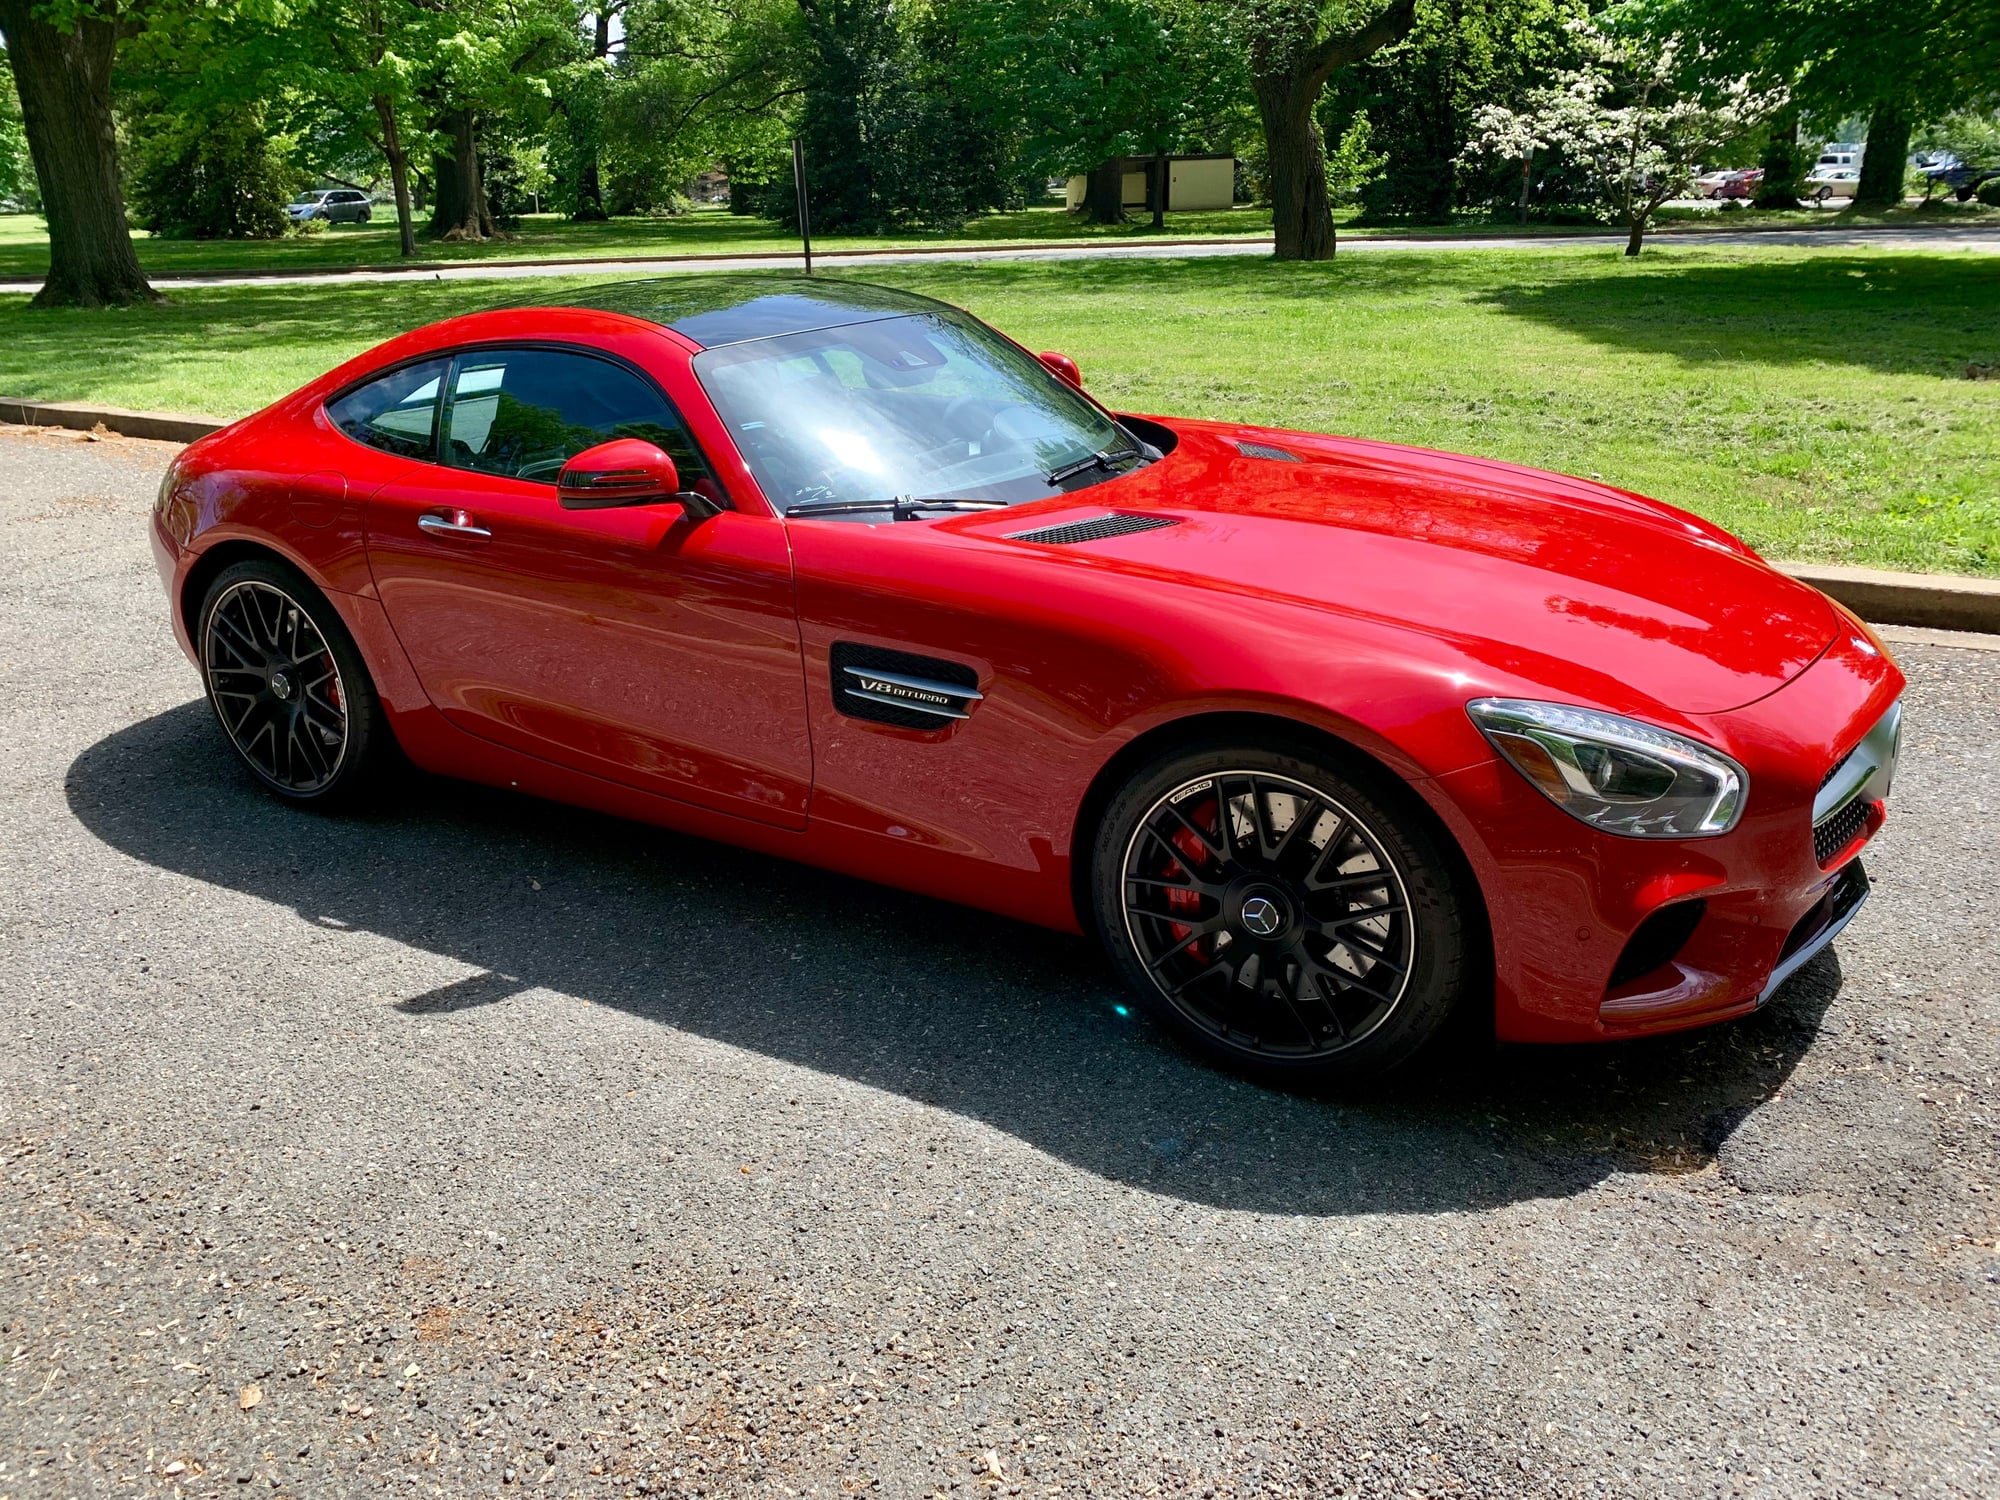 2016 Mercedes-Benz AMG GT S - 2016 Mercedes-Benz AMG GTS with Dynamic Plus - Used - VIN WDDYJ7JA6GA006976 - 13,700 Miles - 8 cyl - 2WD - Automatic - Coupe - Red - Alexandria, VA 22314, United States